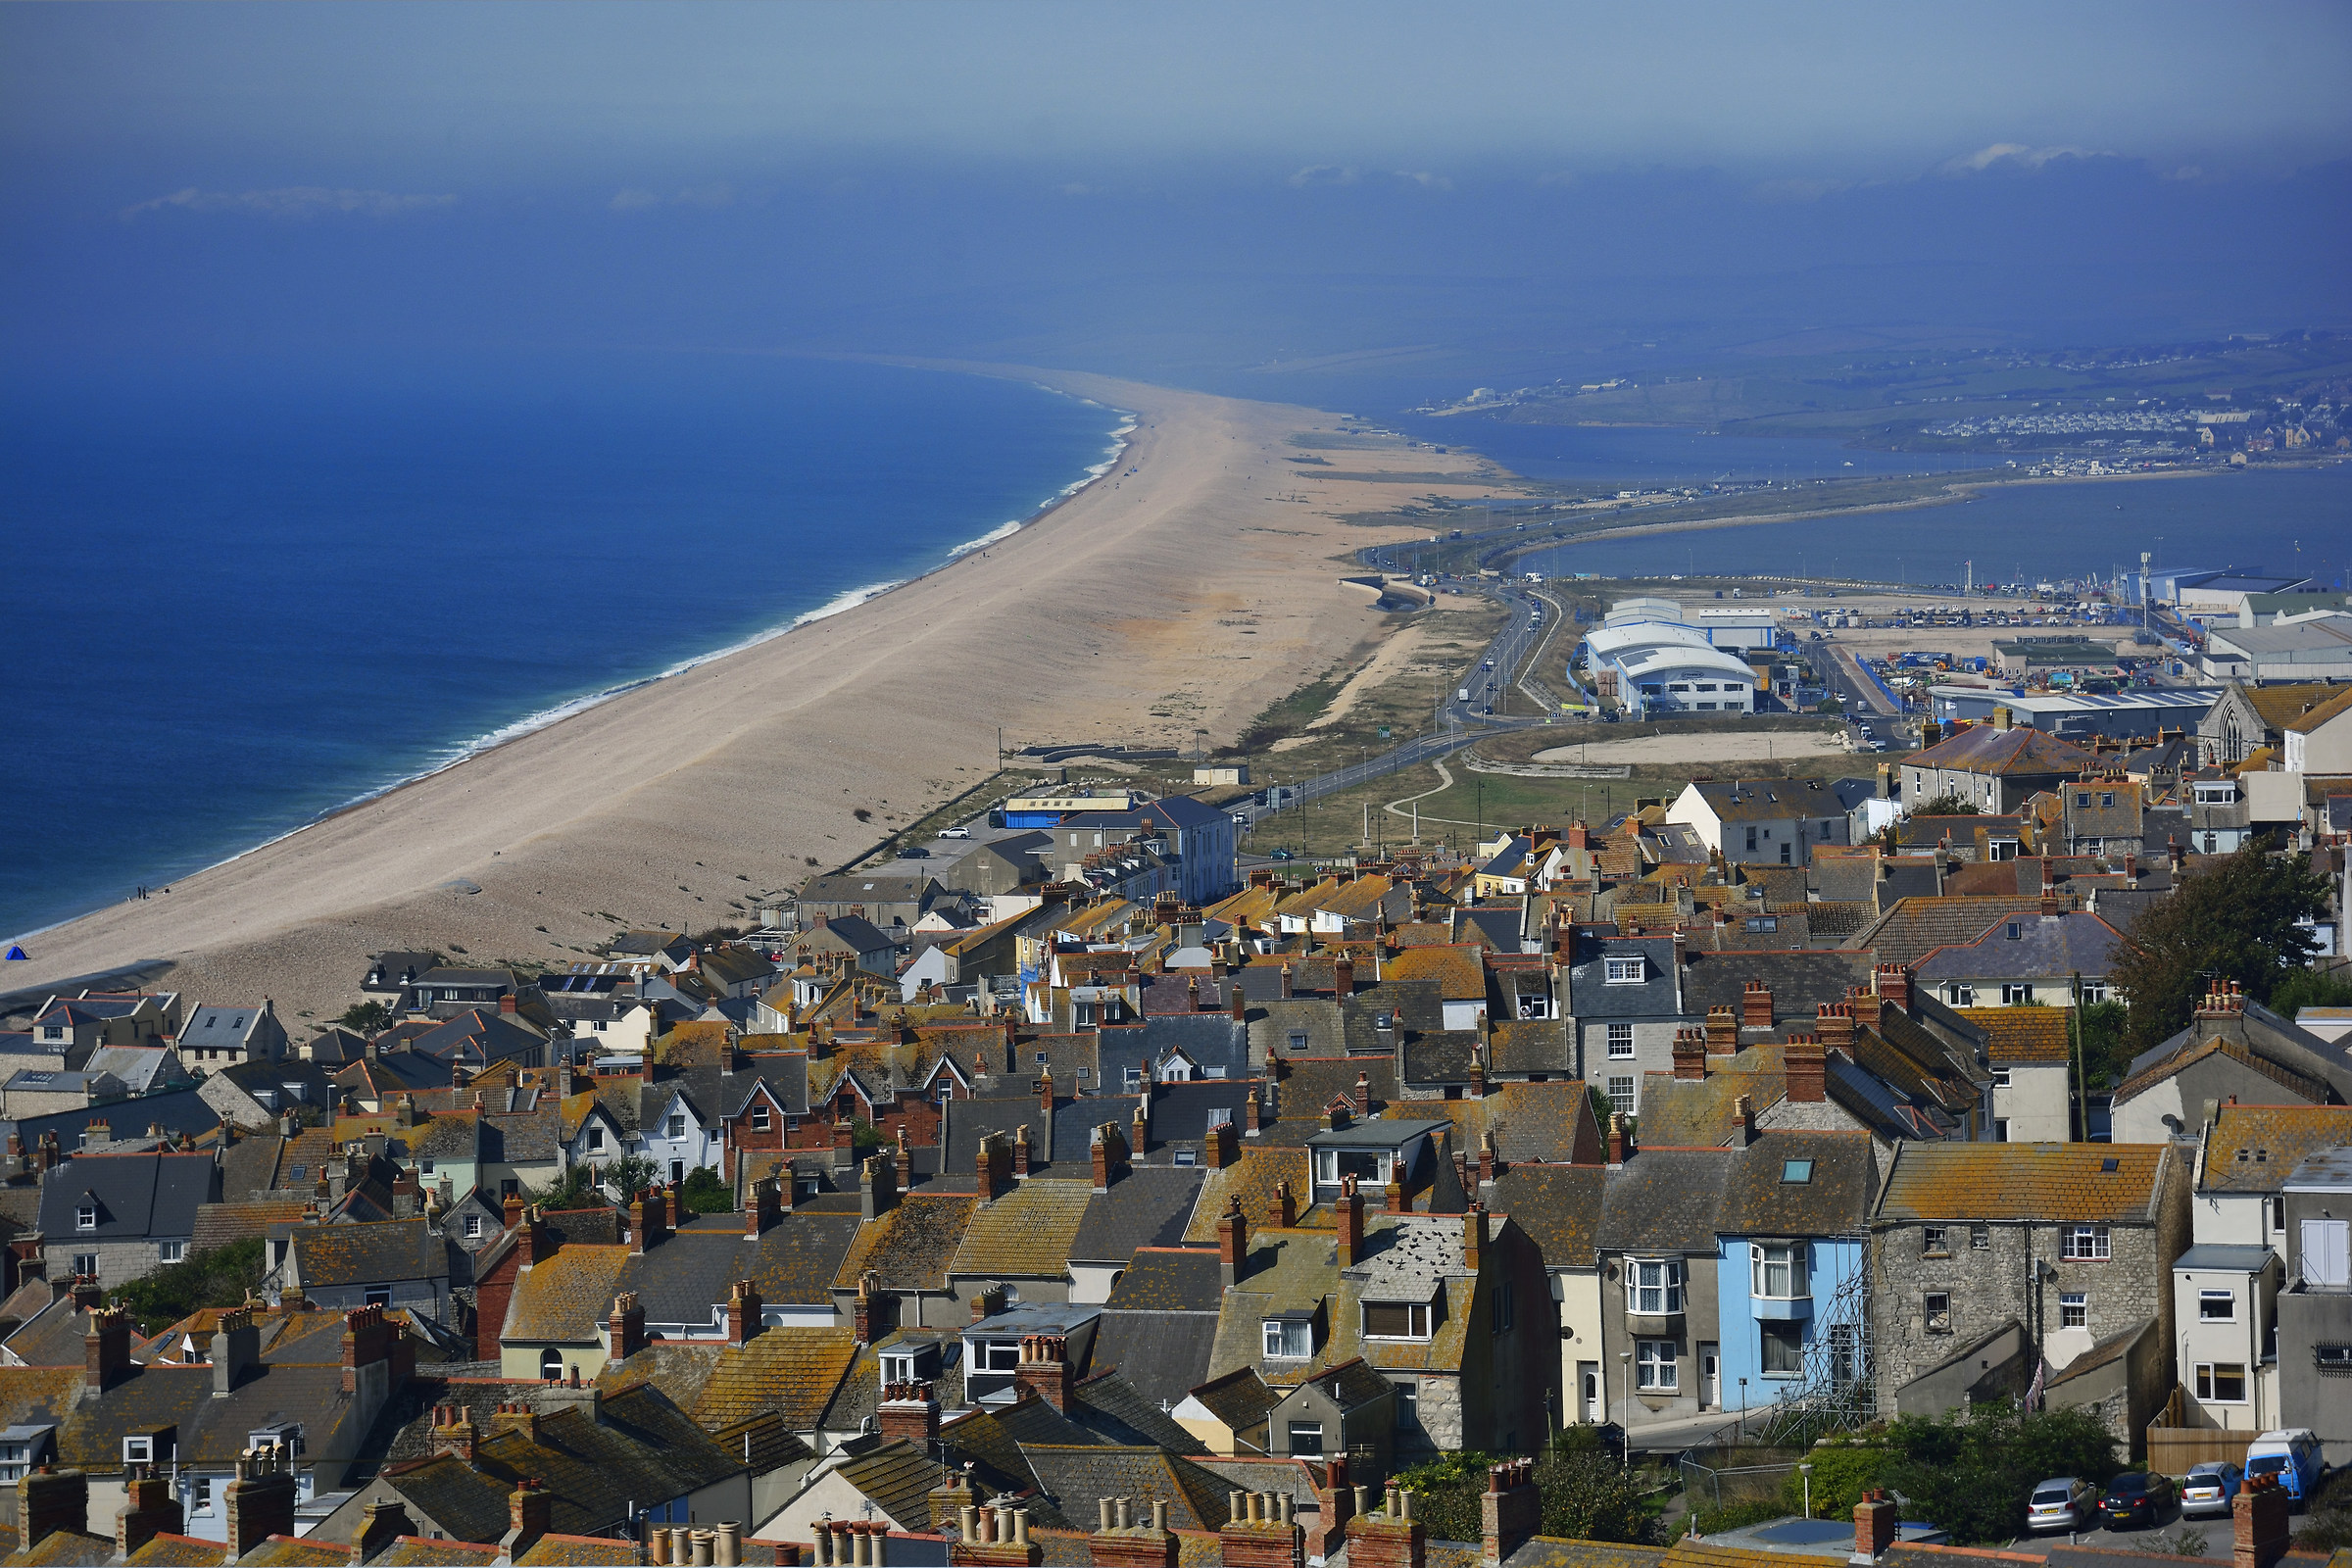 Dorset's 29km Chesil Bank from over the Rooftops...